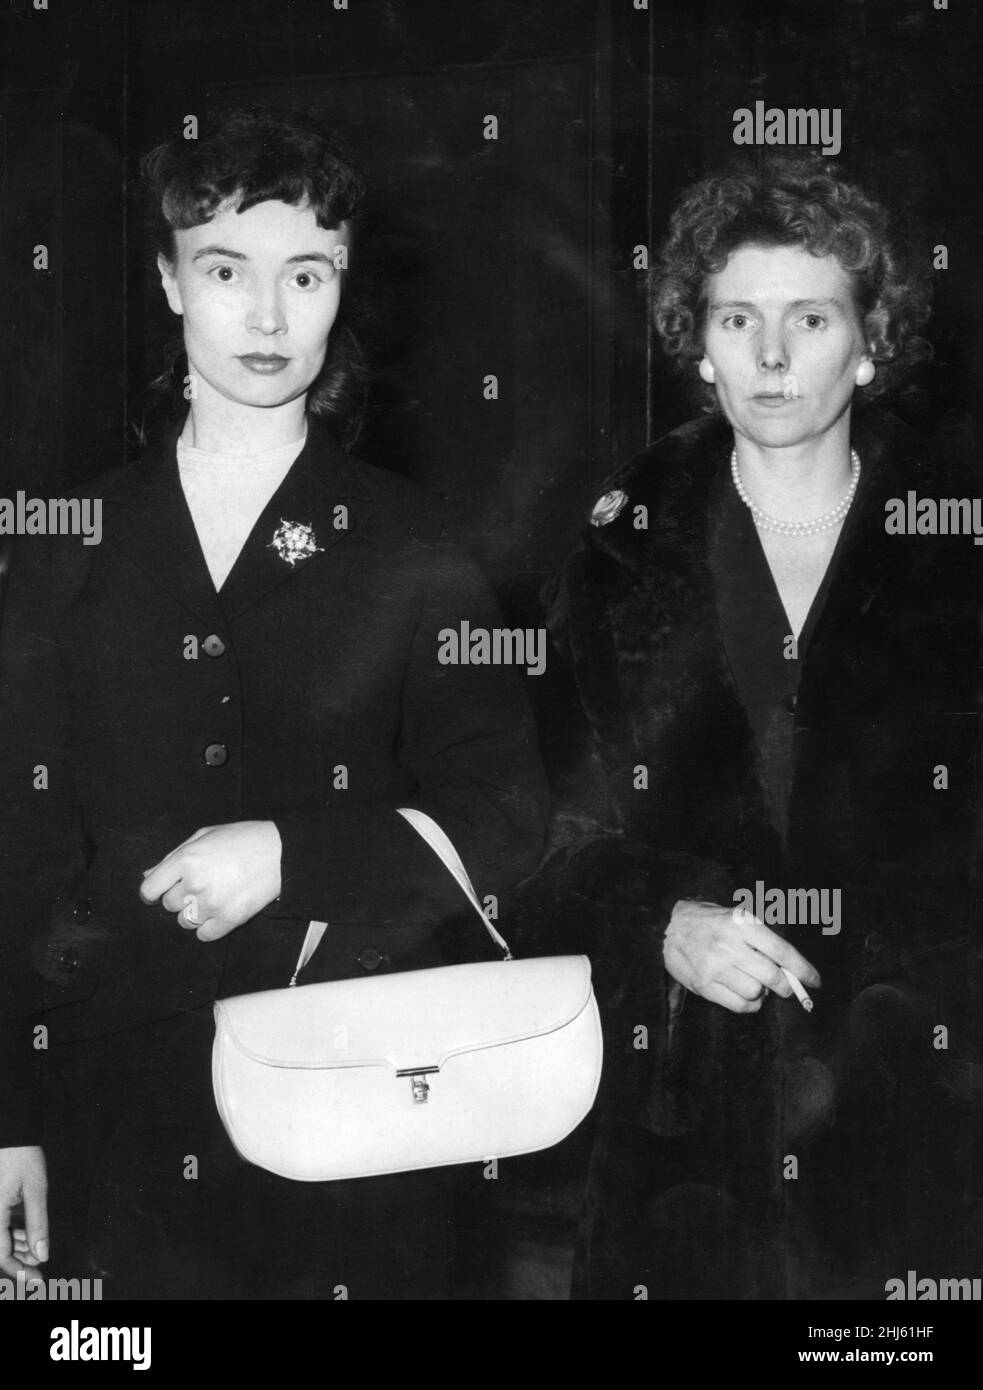 The Five Pound Note Forgery Crime of 1957. Picture shows left Mrs Elsie Ellen Small, one of the accused, and right is Mrs Frances Morgan, wife of George Morgan.  Frances was acquitted.  Mr George Morgan, 37, a car dealer of Baskerville Road, Wandsworth was found guilty of conspiracy to forge five pound notes and of possessing 540 forged notes.  He was jailed for eight years in January 1958. The first man to be tried for the crime was Albert Small who was jailed in December 1957.   A total of 5 people was tried at The Old Bailey in connection with the forging and printing of five pound notes an Stock Photo